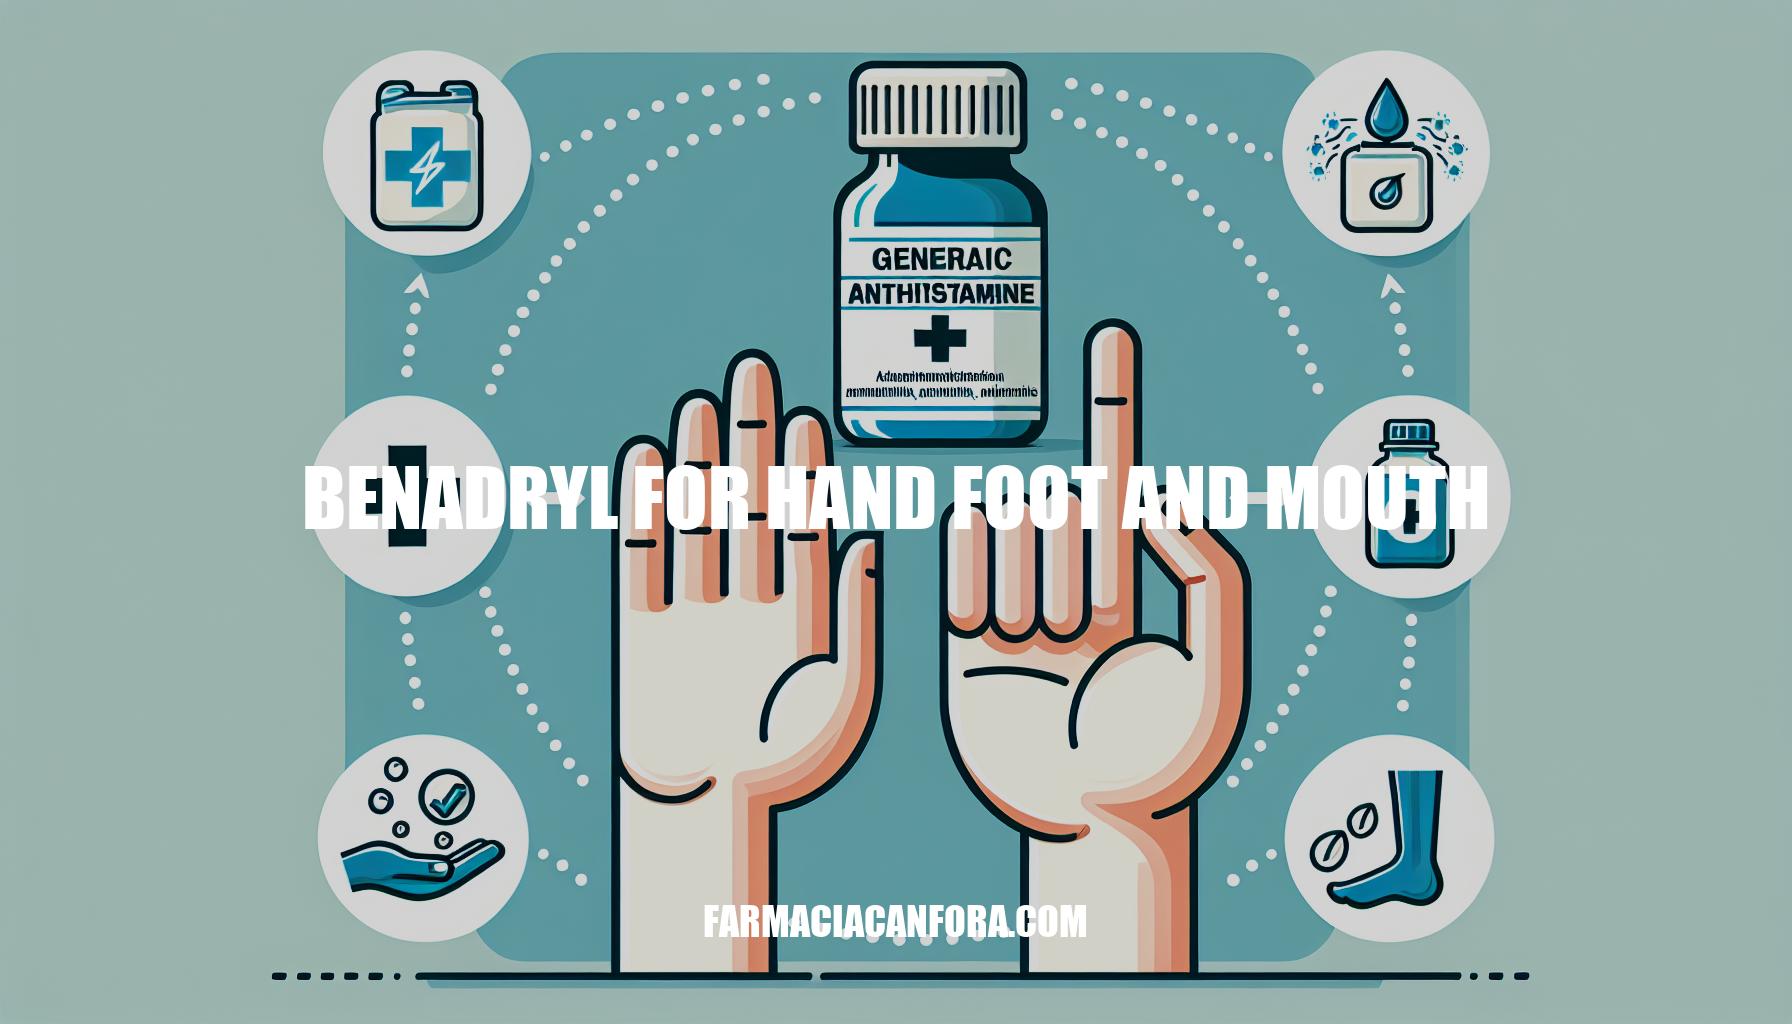 Using Benadryl for Hand, Foot, and Mouth: A Guide